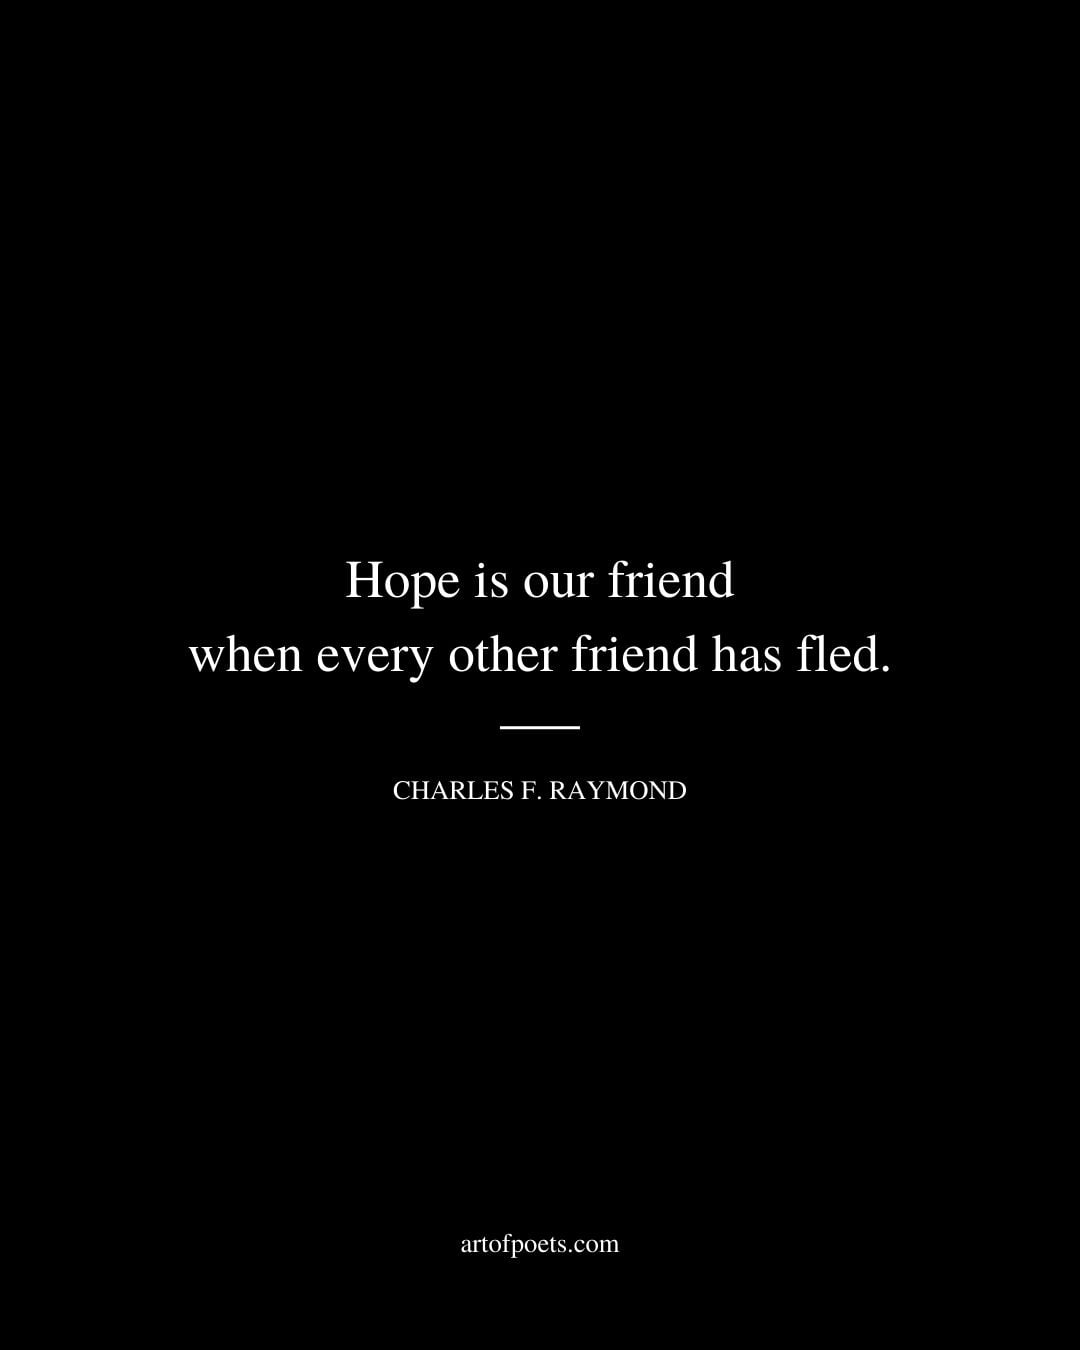 Hope is our friend when every other friend has fled. Charles F. Raymond